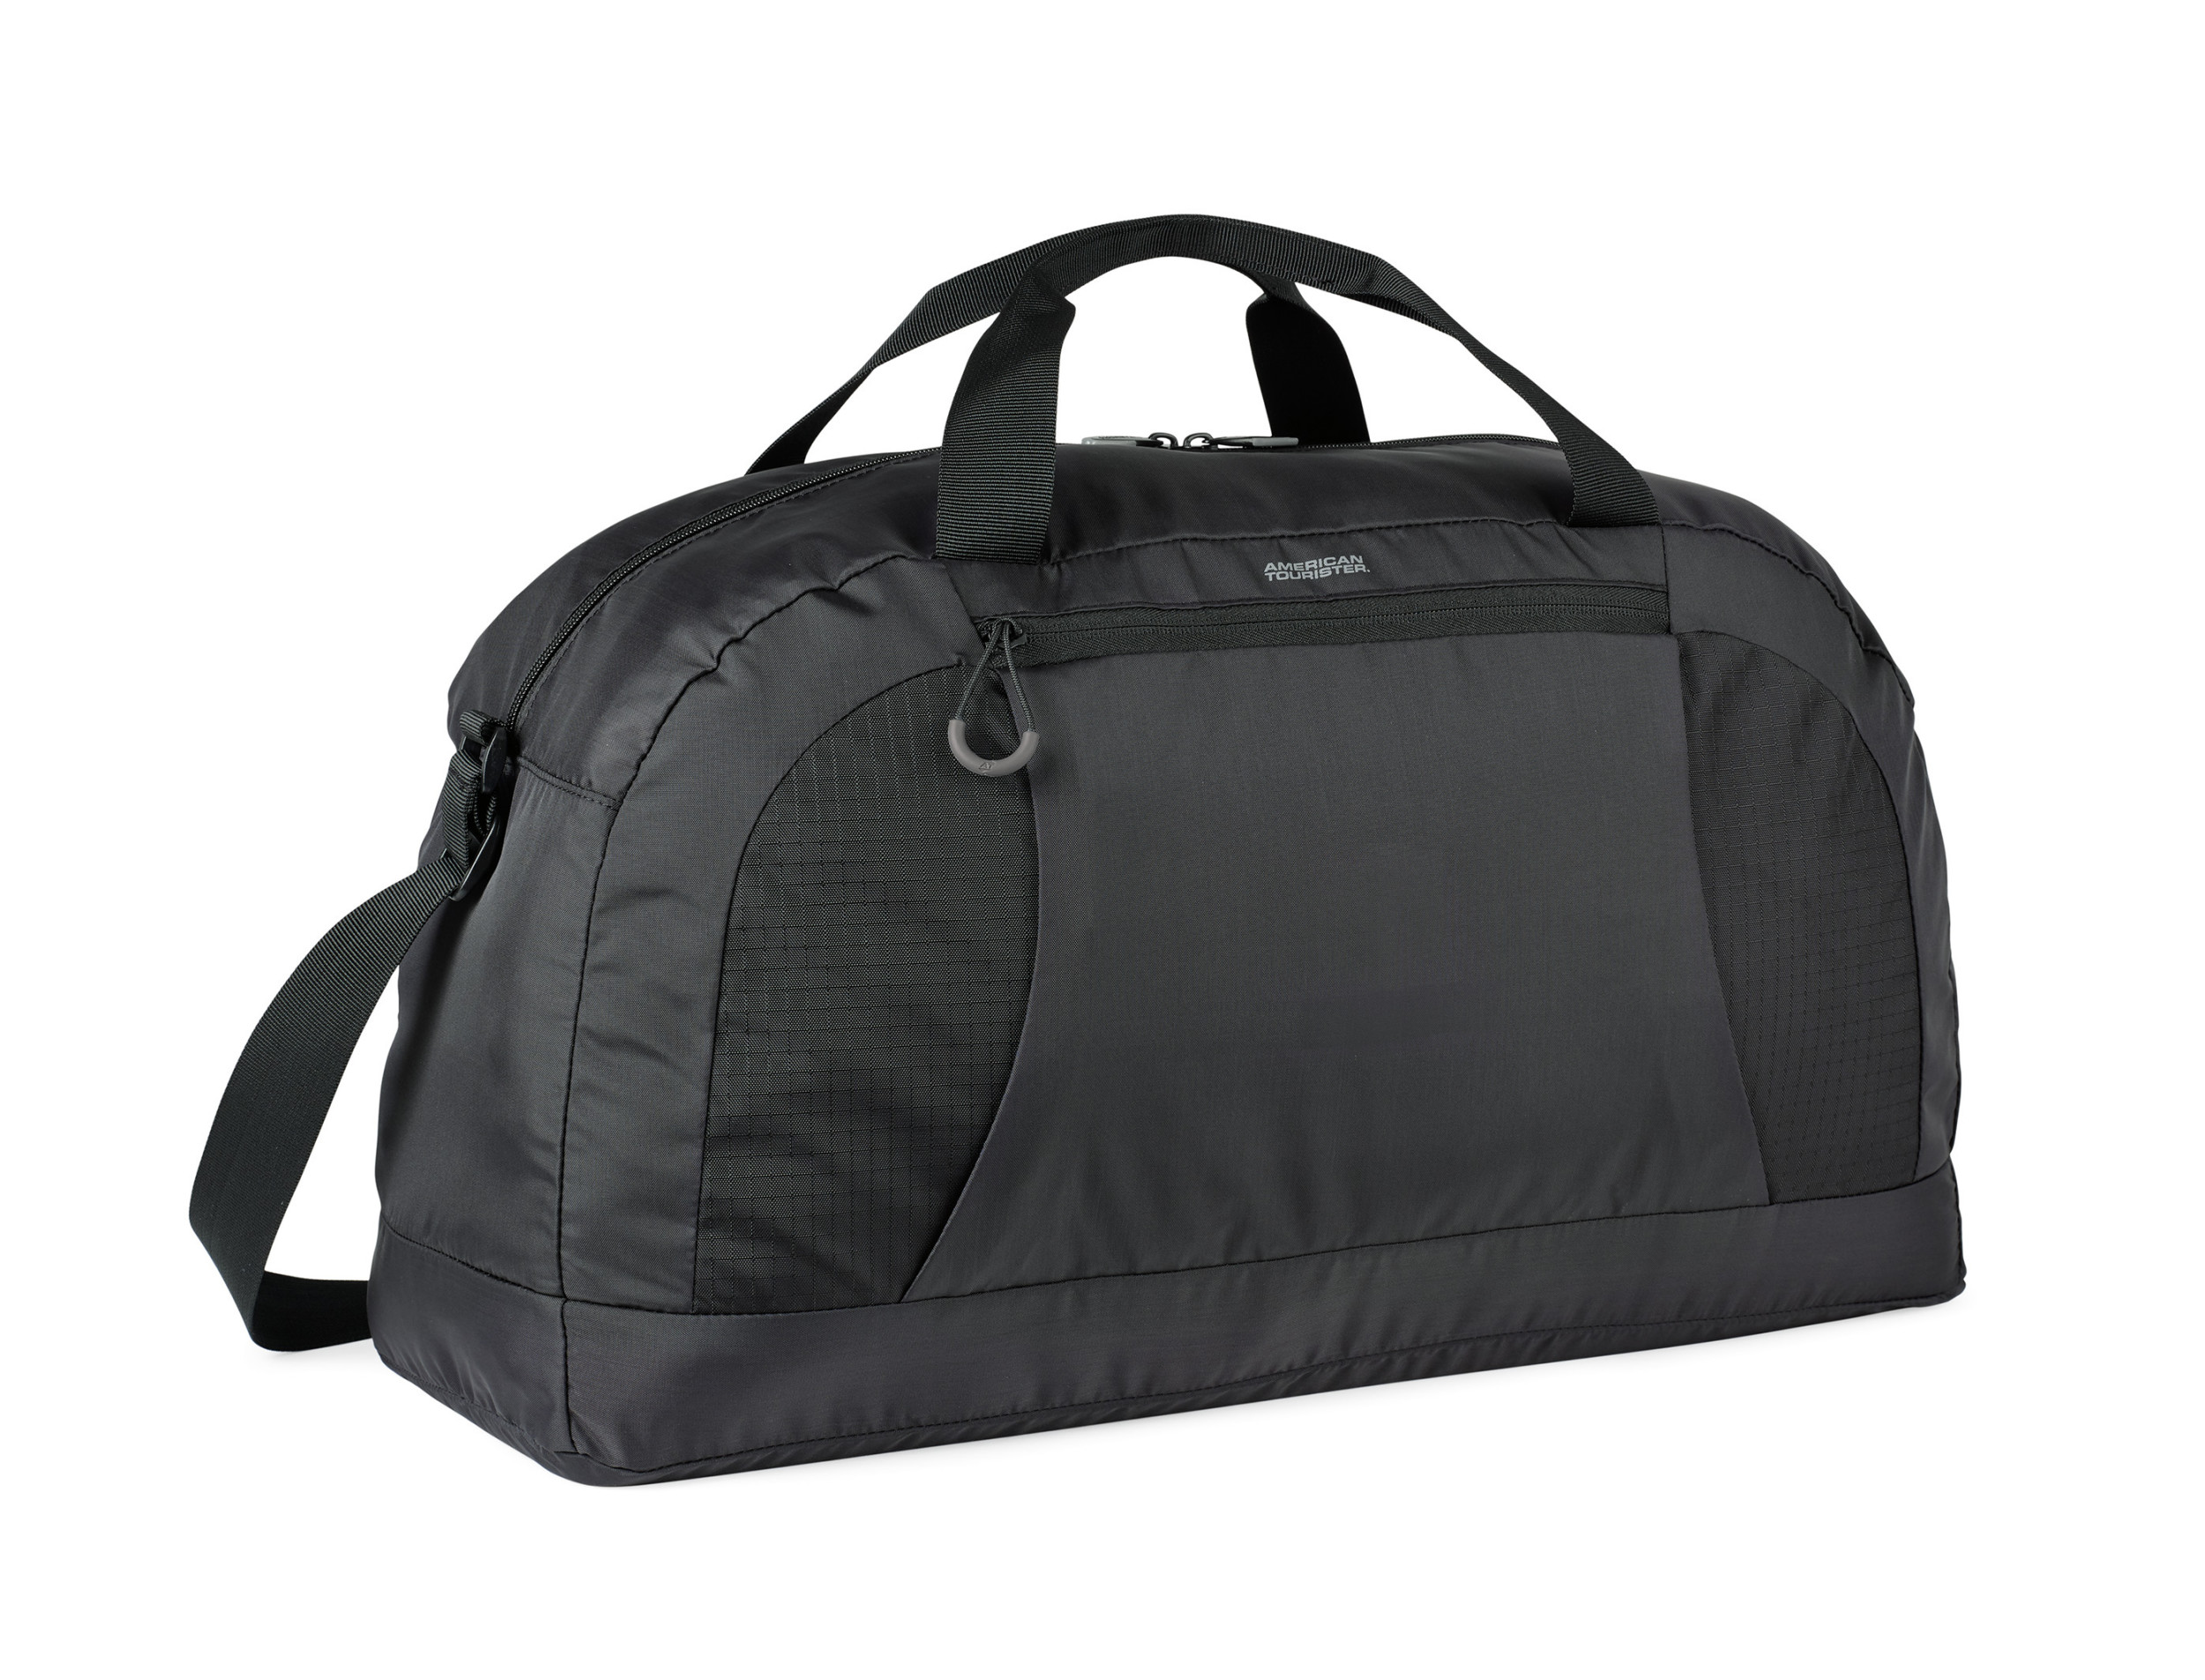 American Tourister 96028 - Voyager Packable Duffel